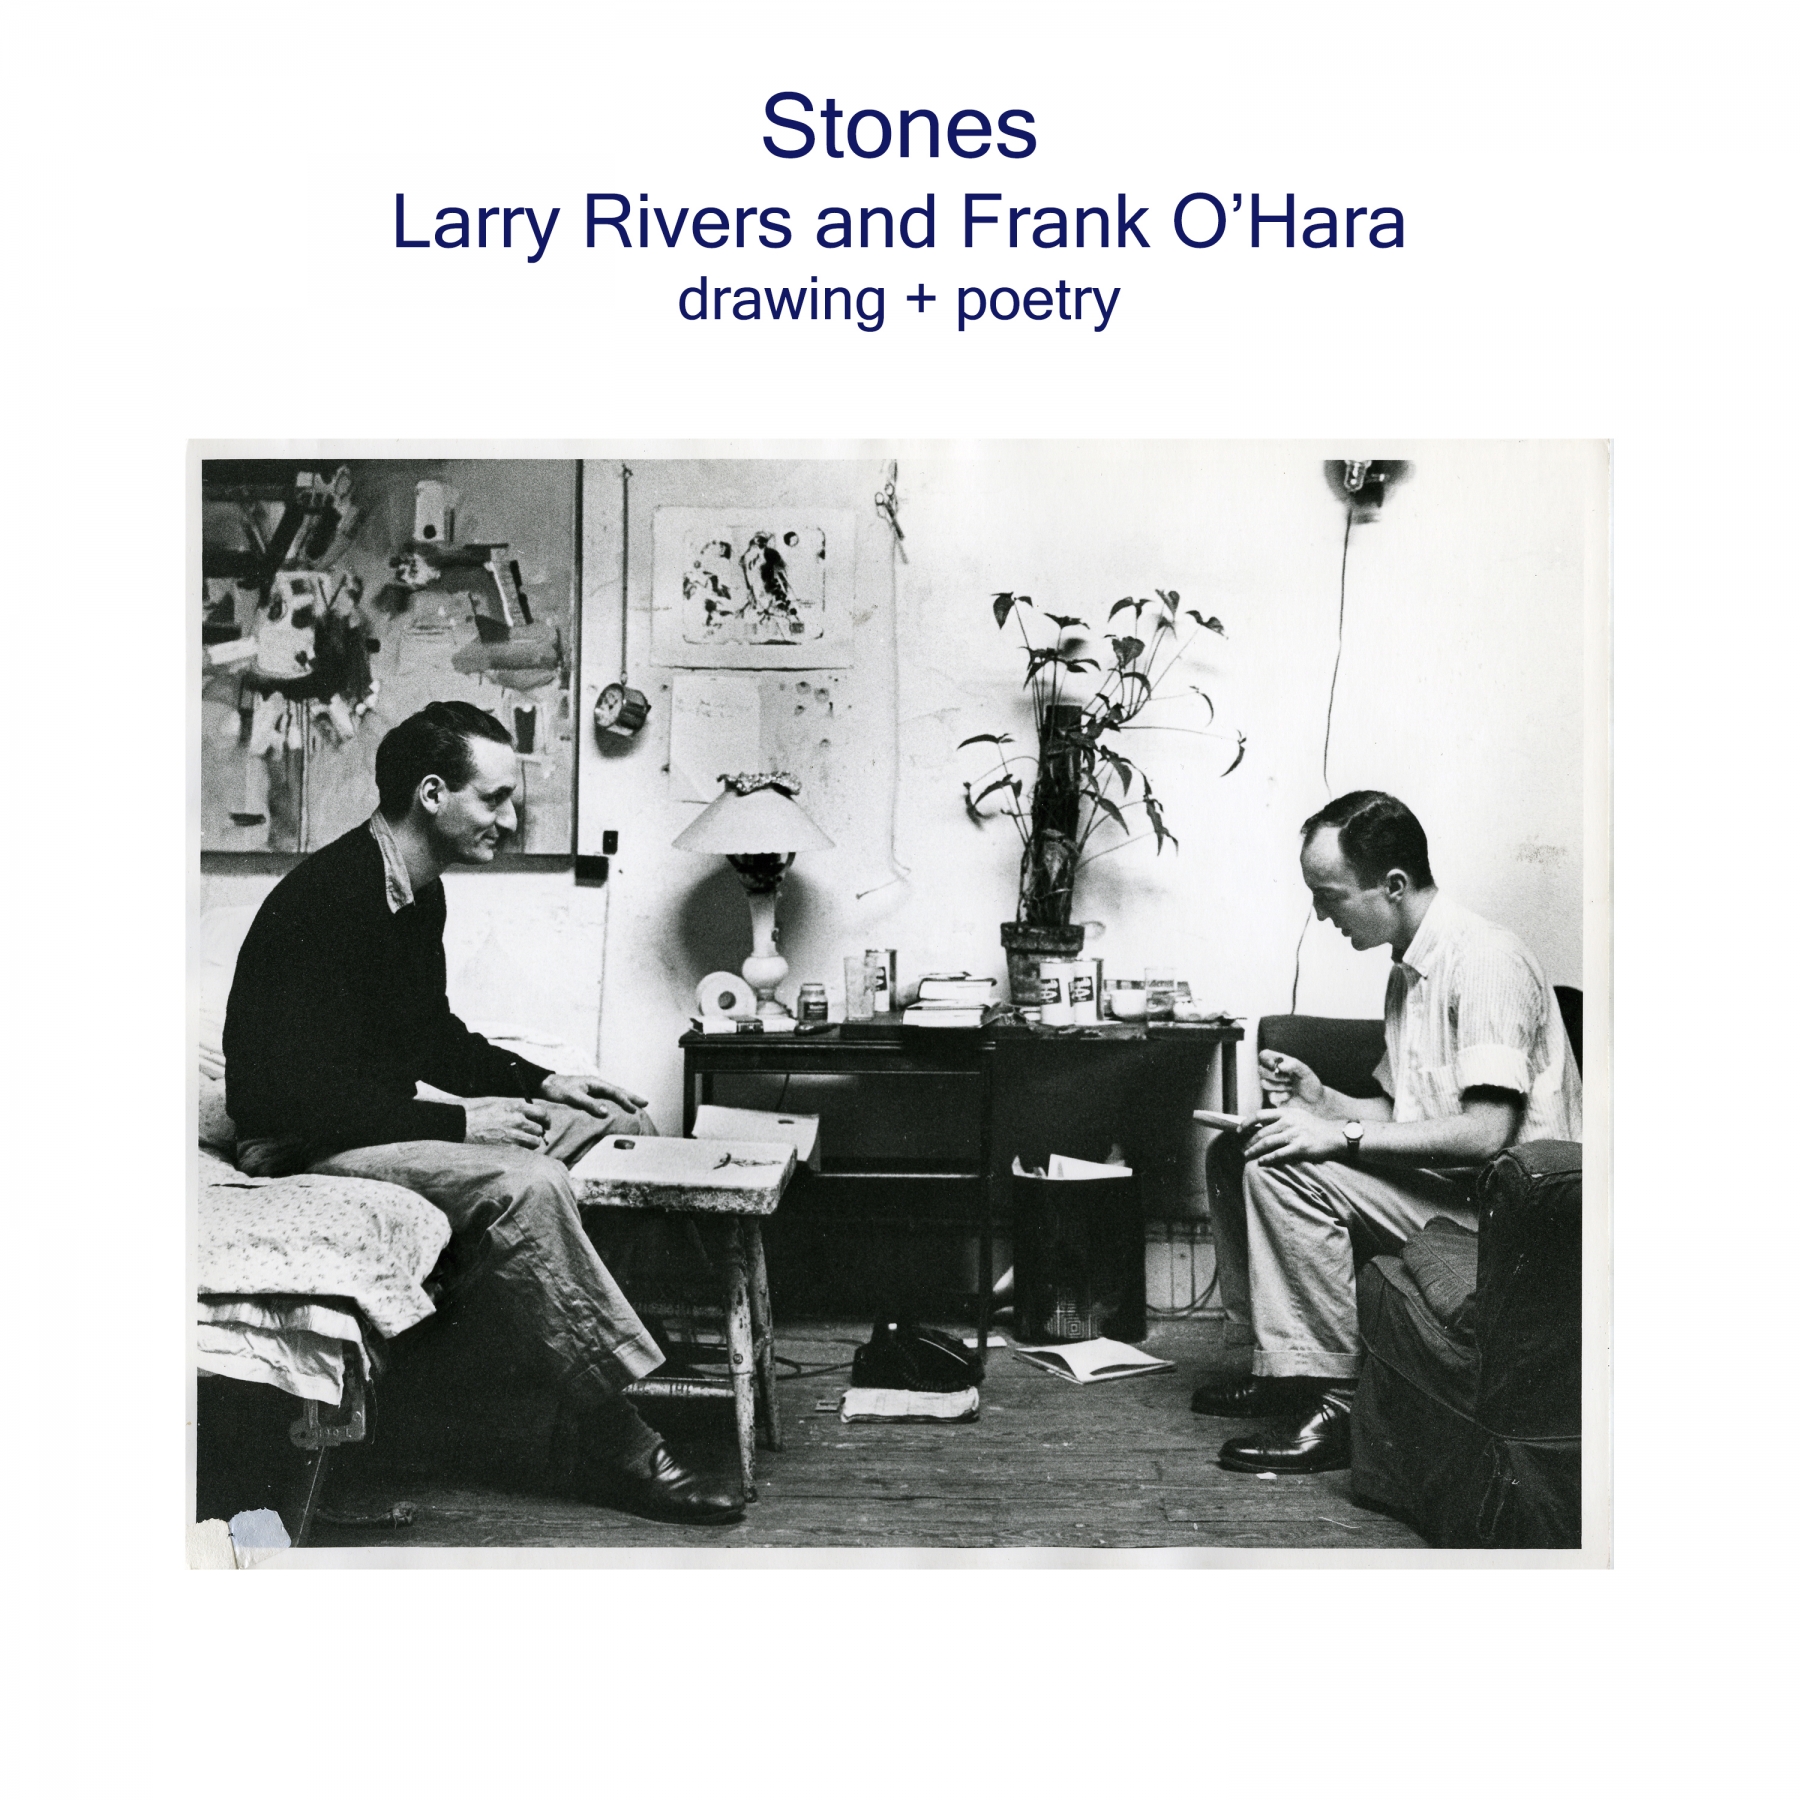 Larry Rivers and Frank O'Hara - Stones